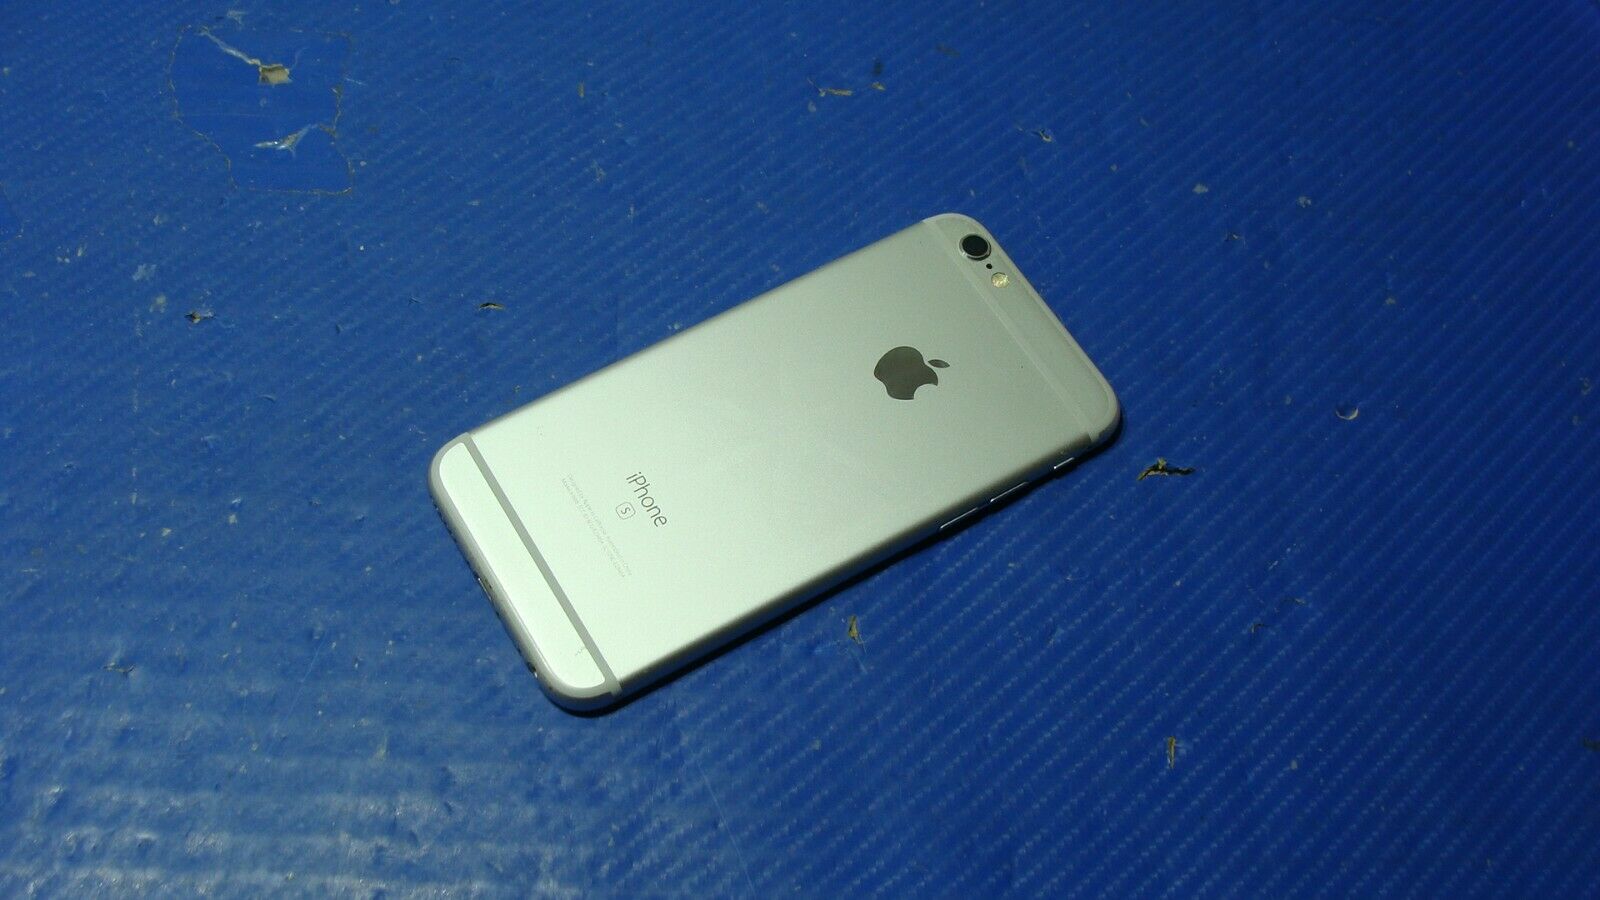 iPhone 6s A1688 MKT02LL/A Late 2015 4.7